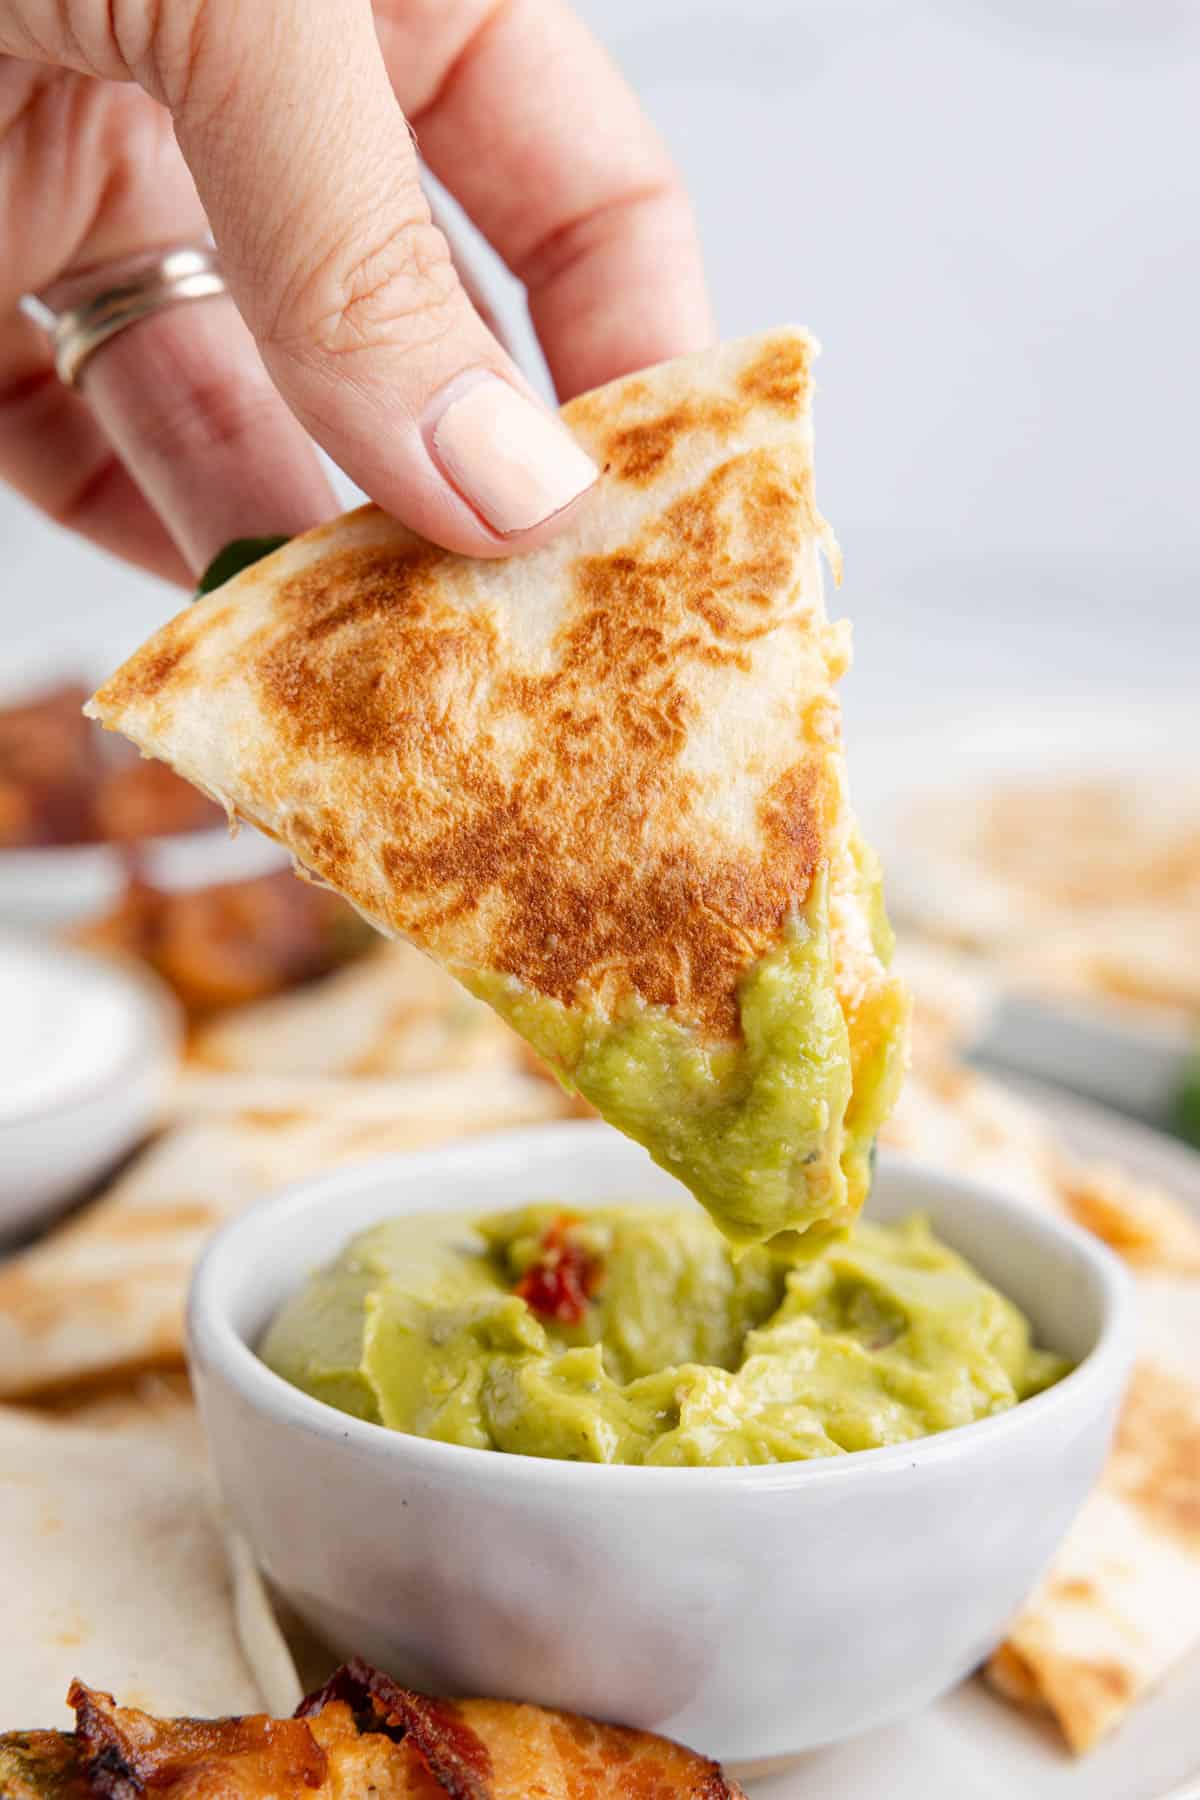 A hand holding a triangle of quesadilla to dip it into guacamole.